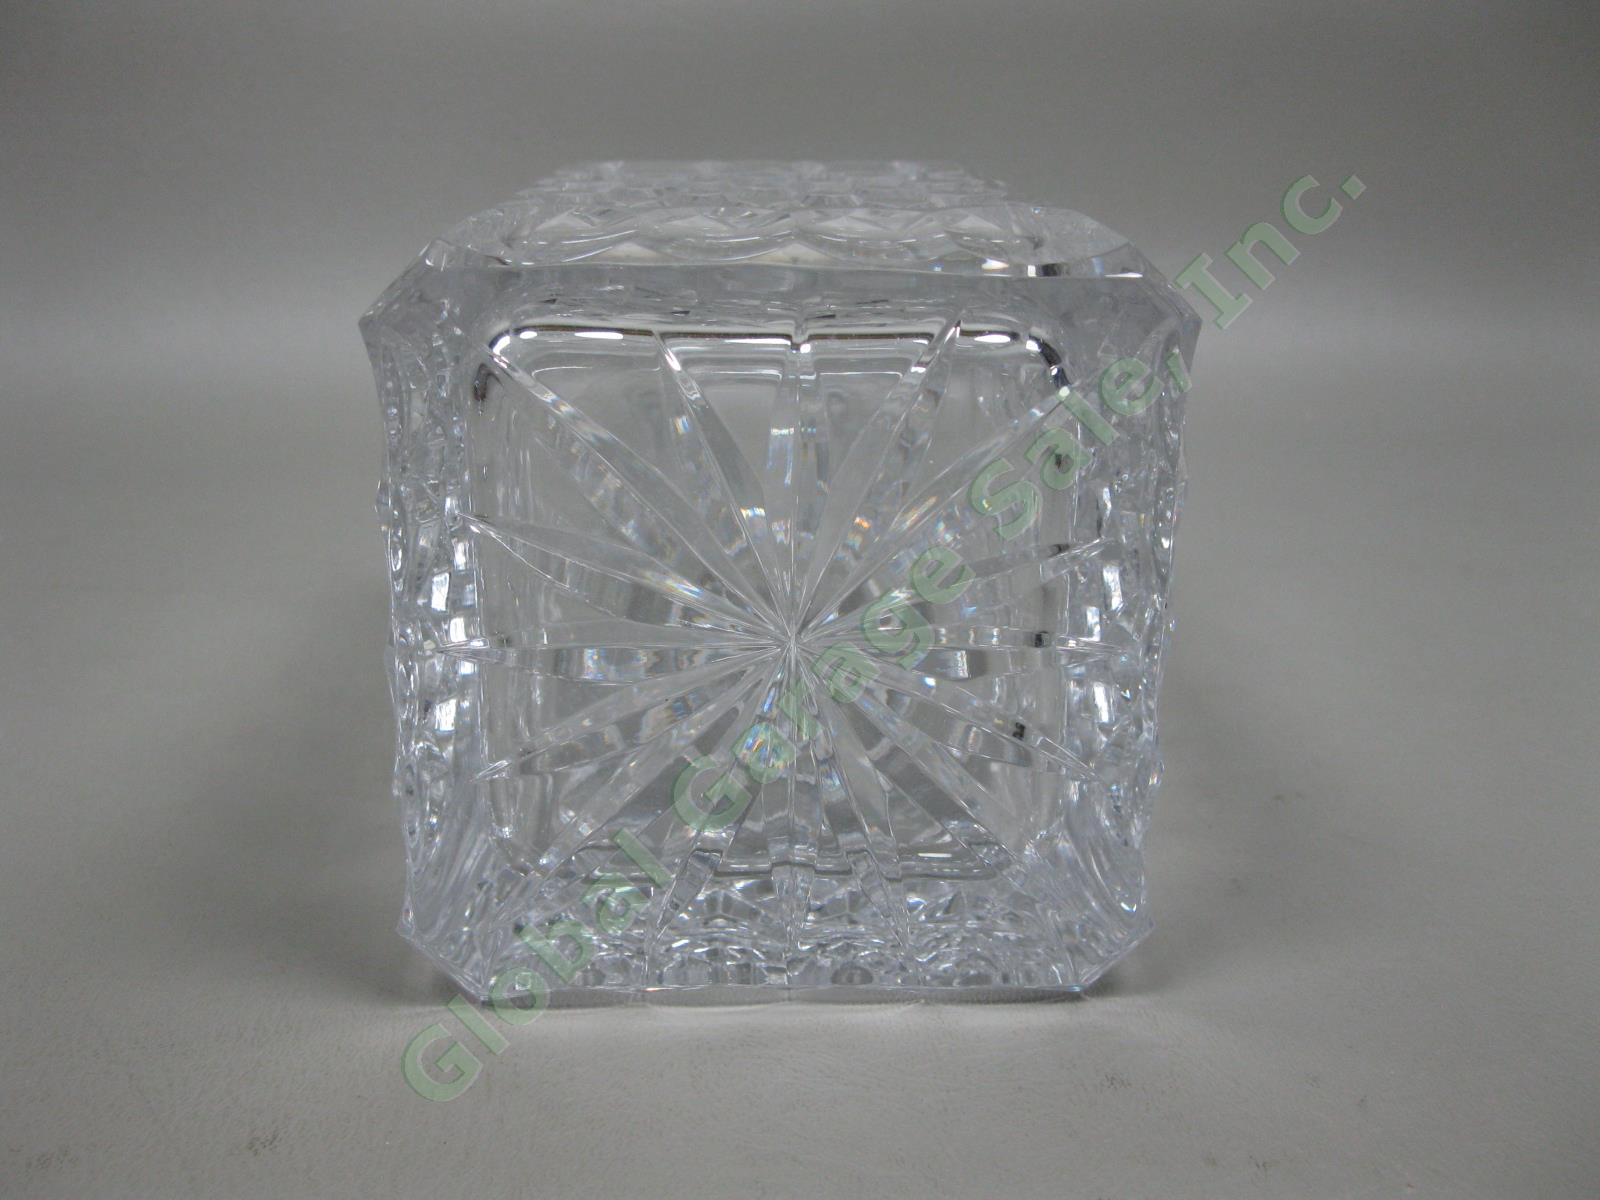 Vintage Waterford 10.75" Cut Crystal Rectangular Glass Liquor Decanter & Stopper 6